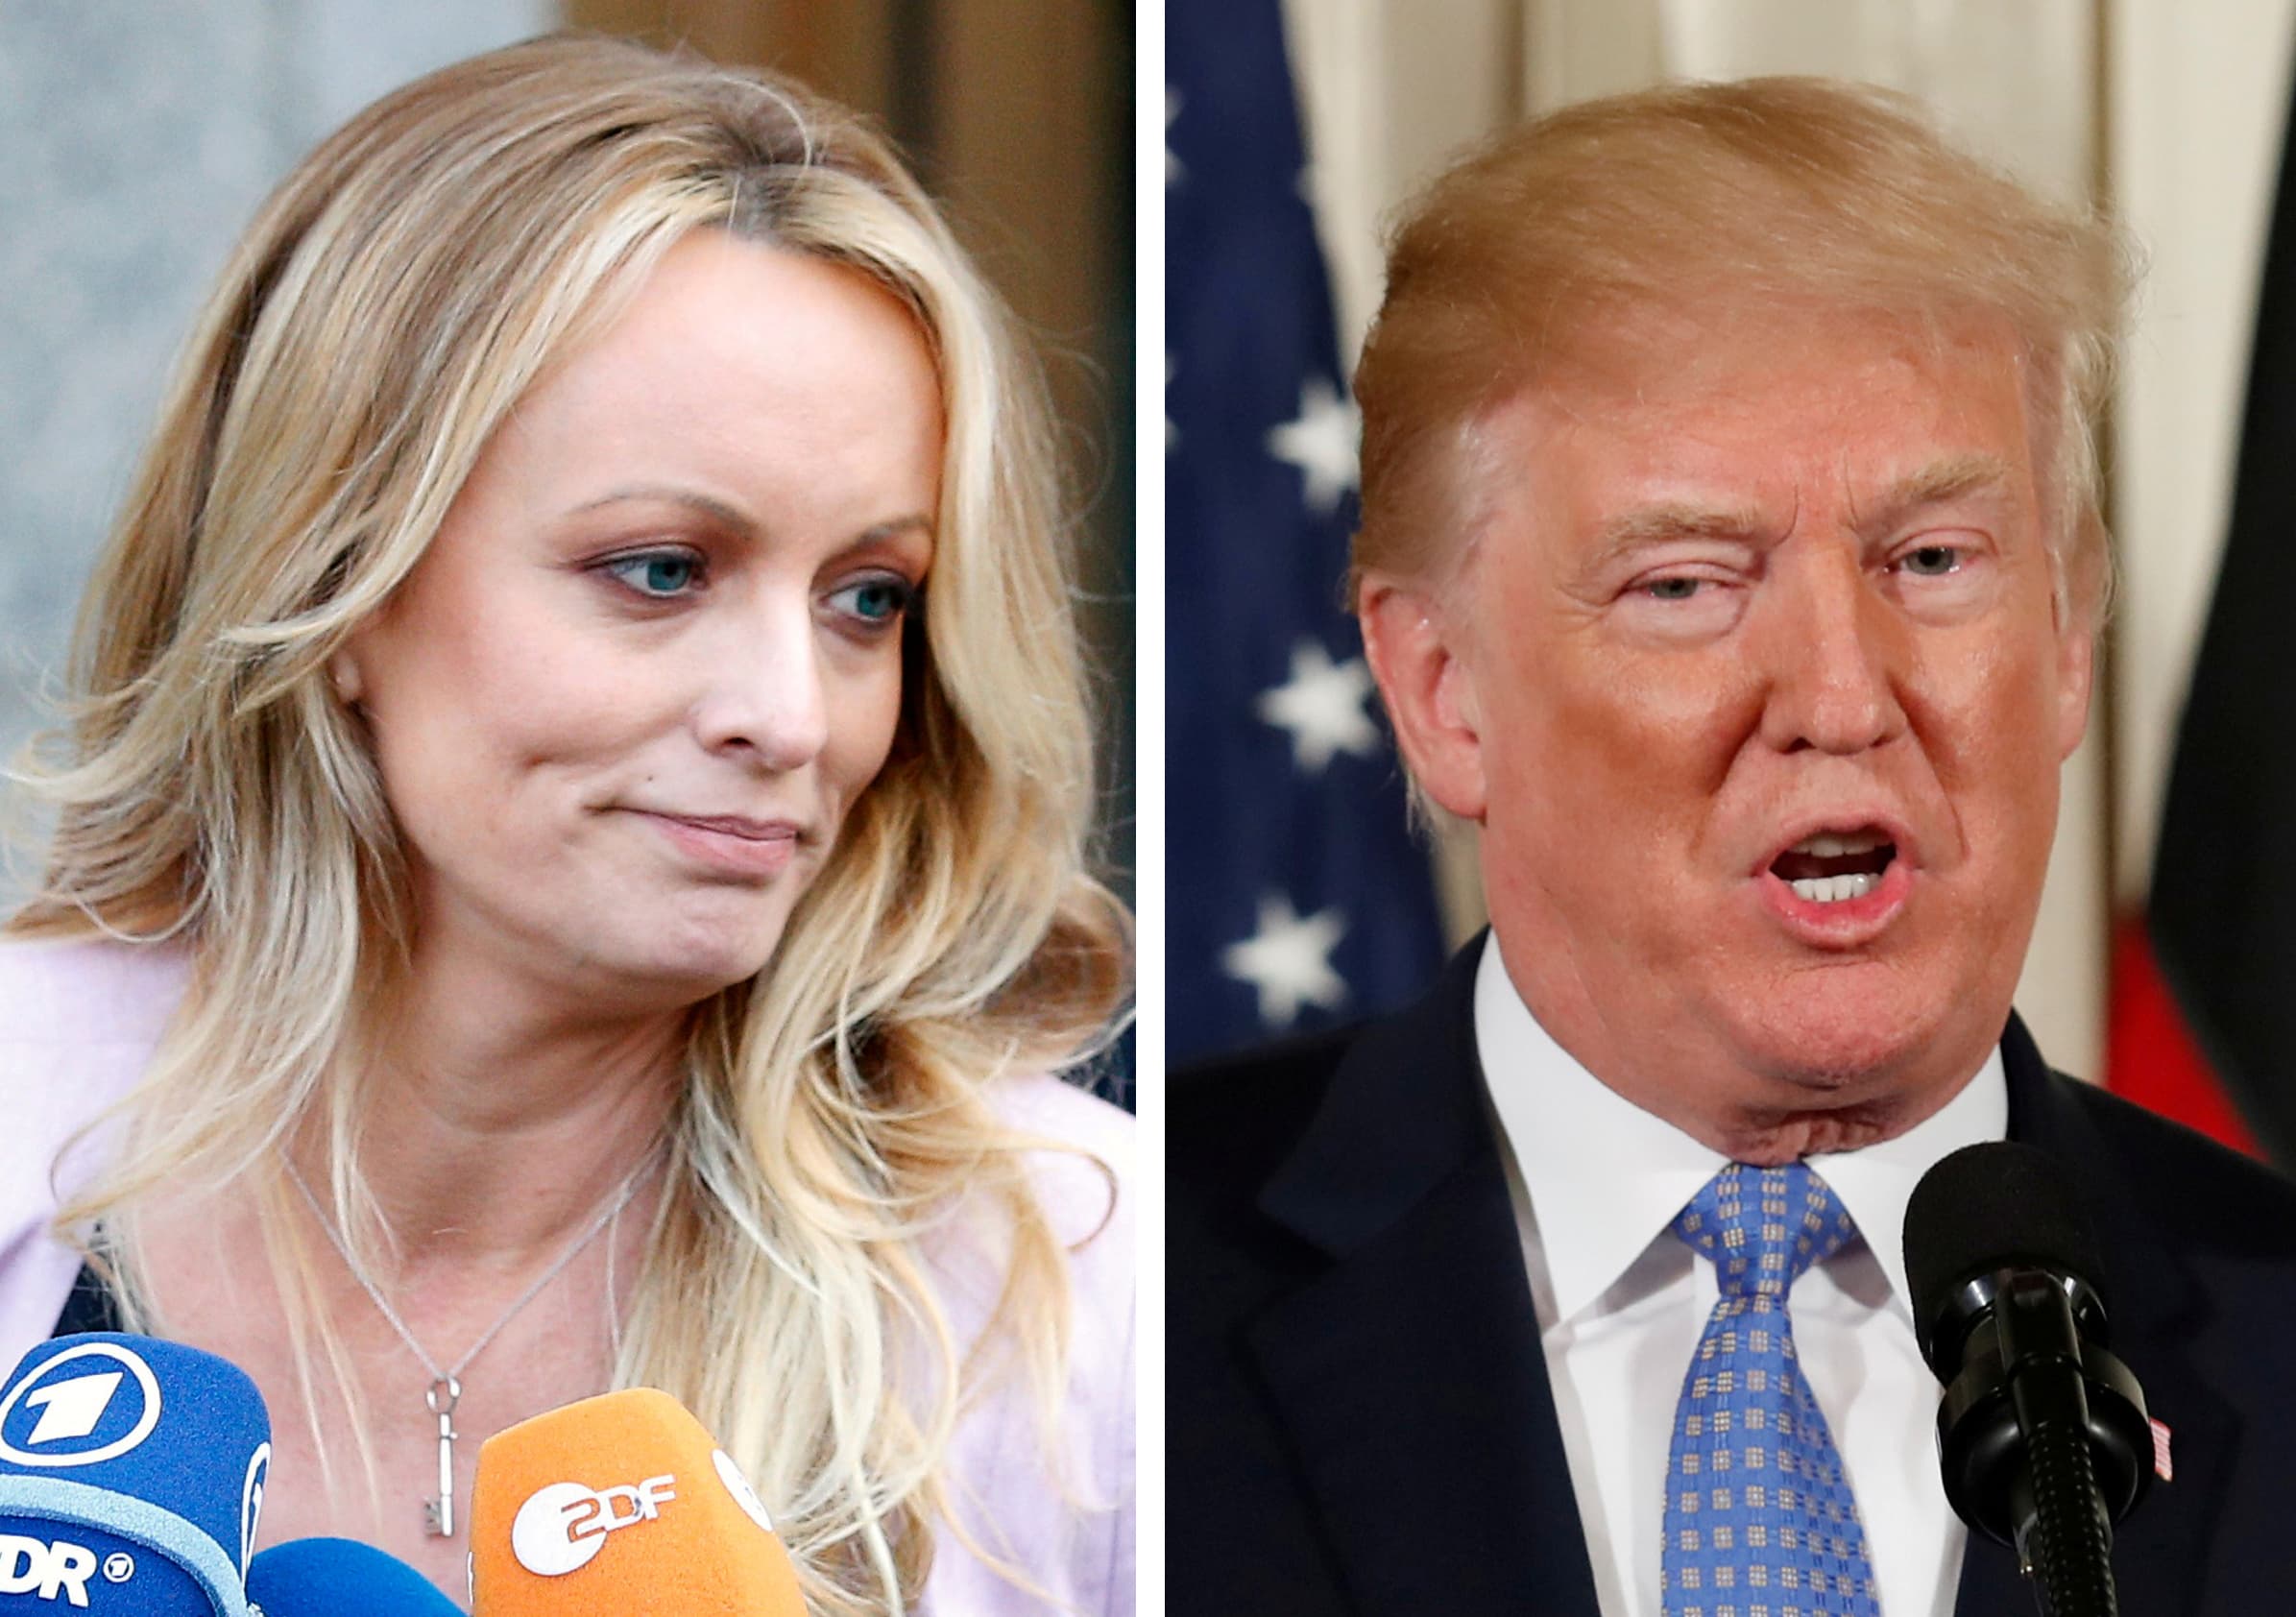 30 Year Sex Video - Porn star Stormy Daniels loses appeal of Trump case